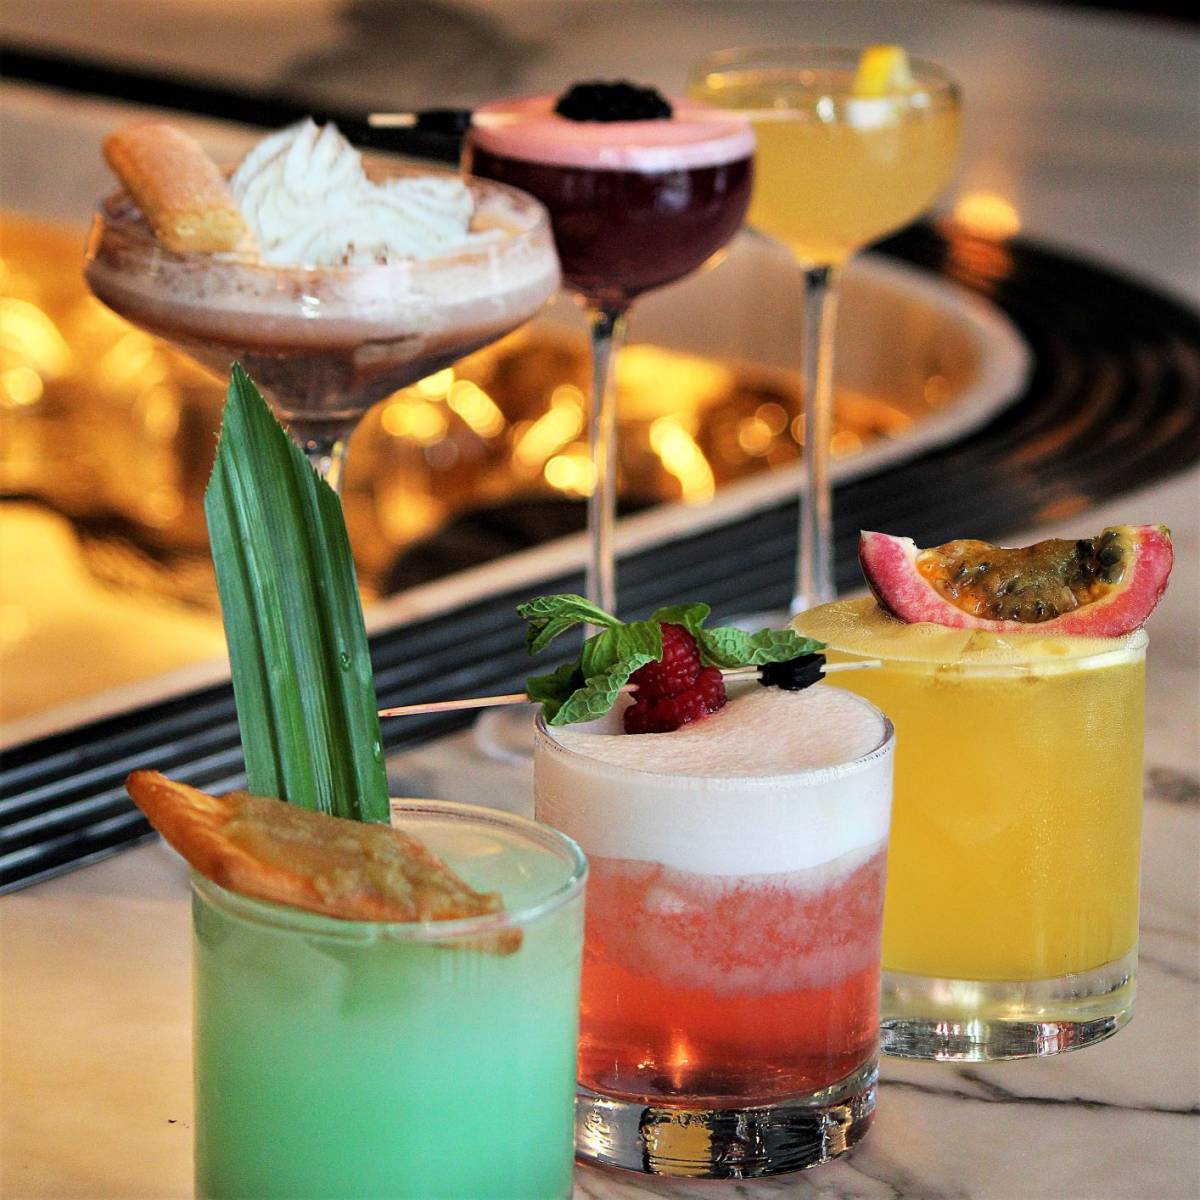 SHAKING THINGS UP WITH NEW COCKTAILS AT GINETT